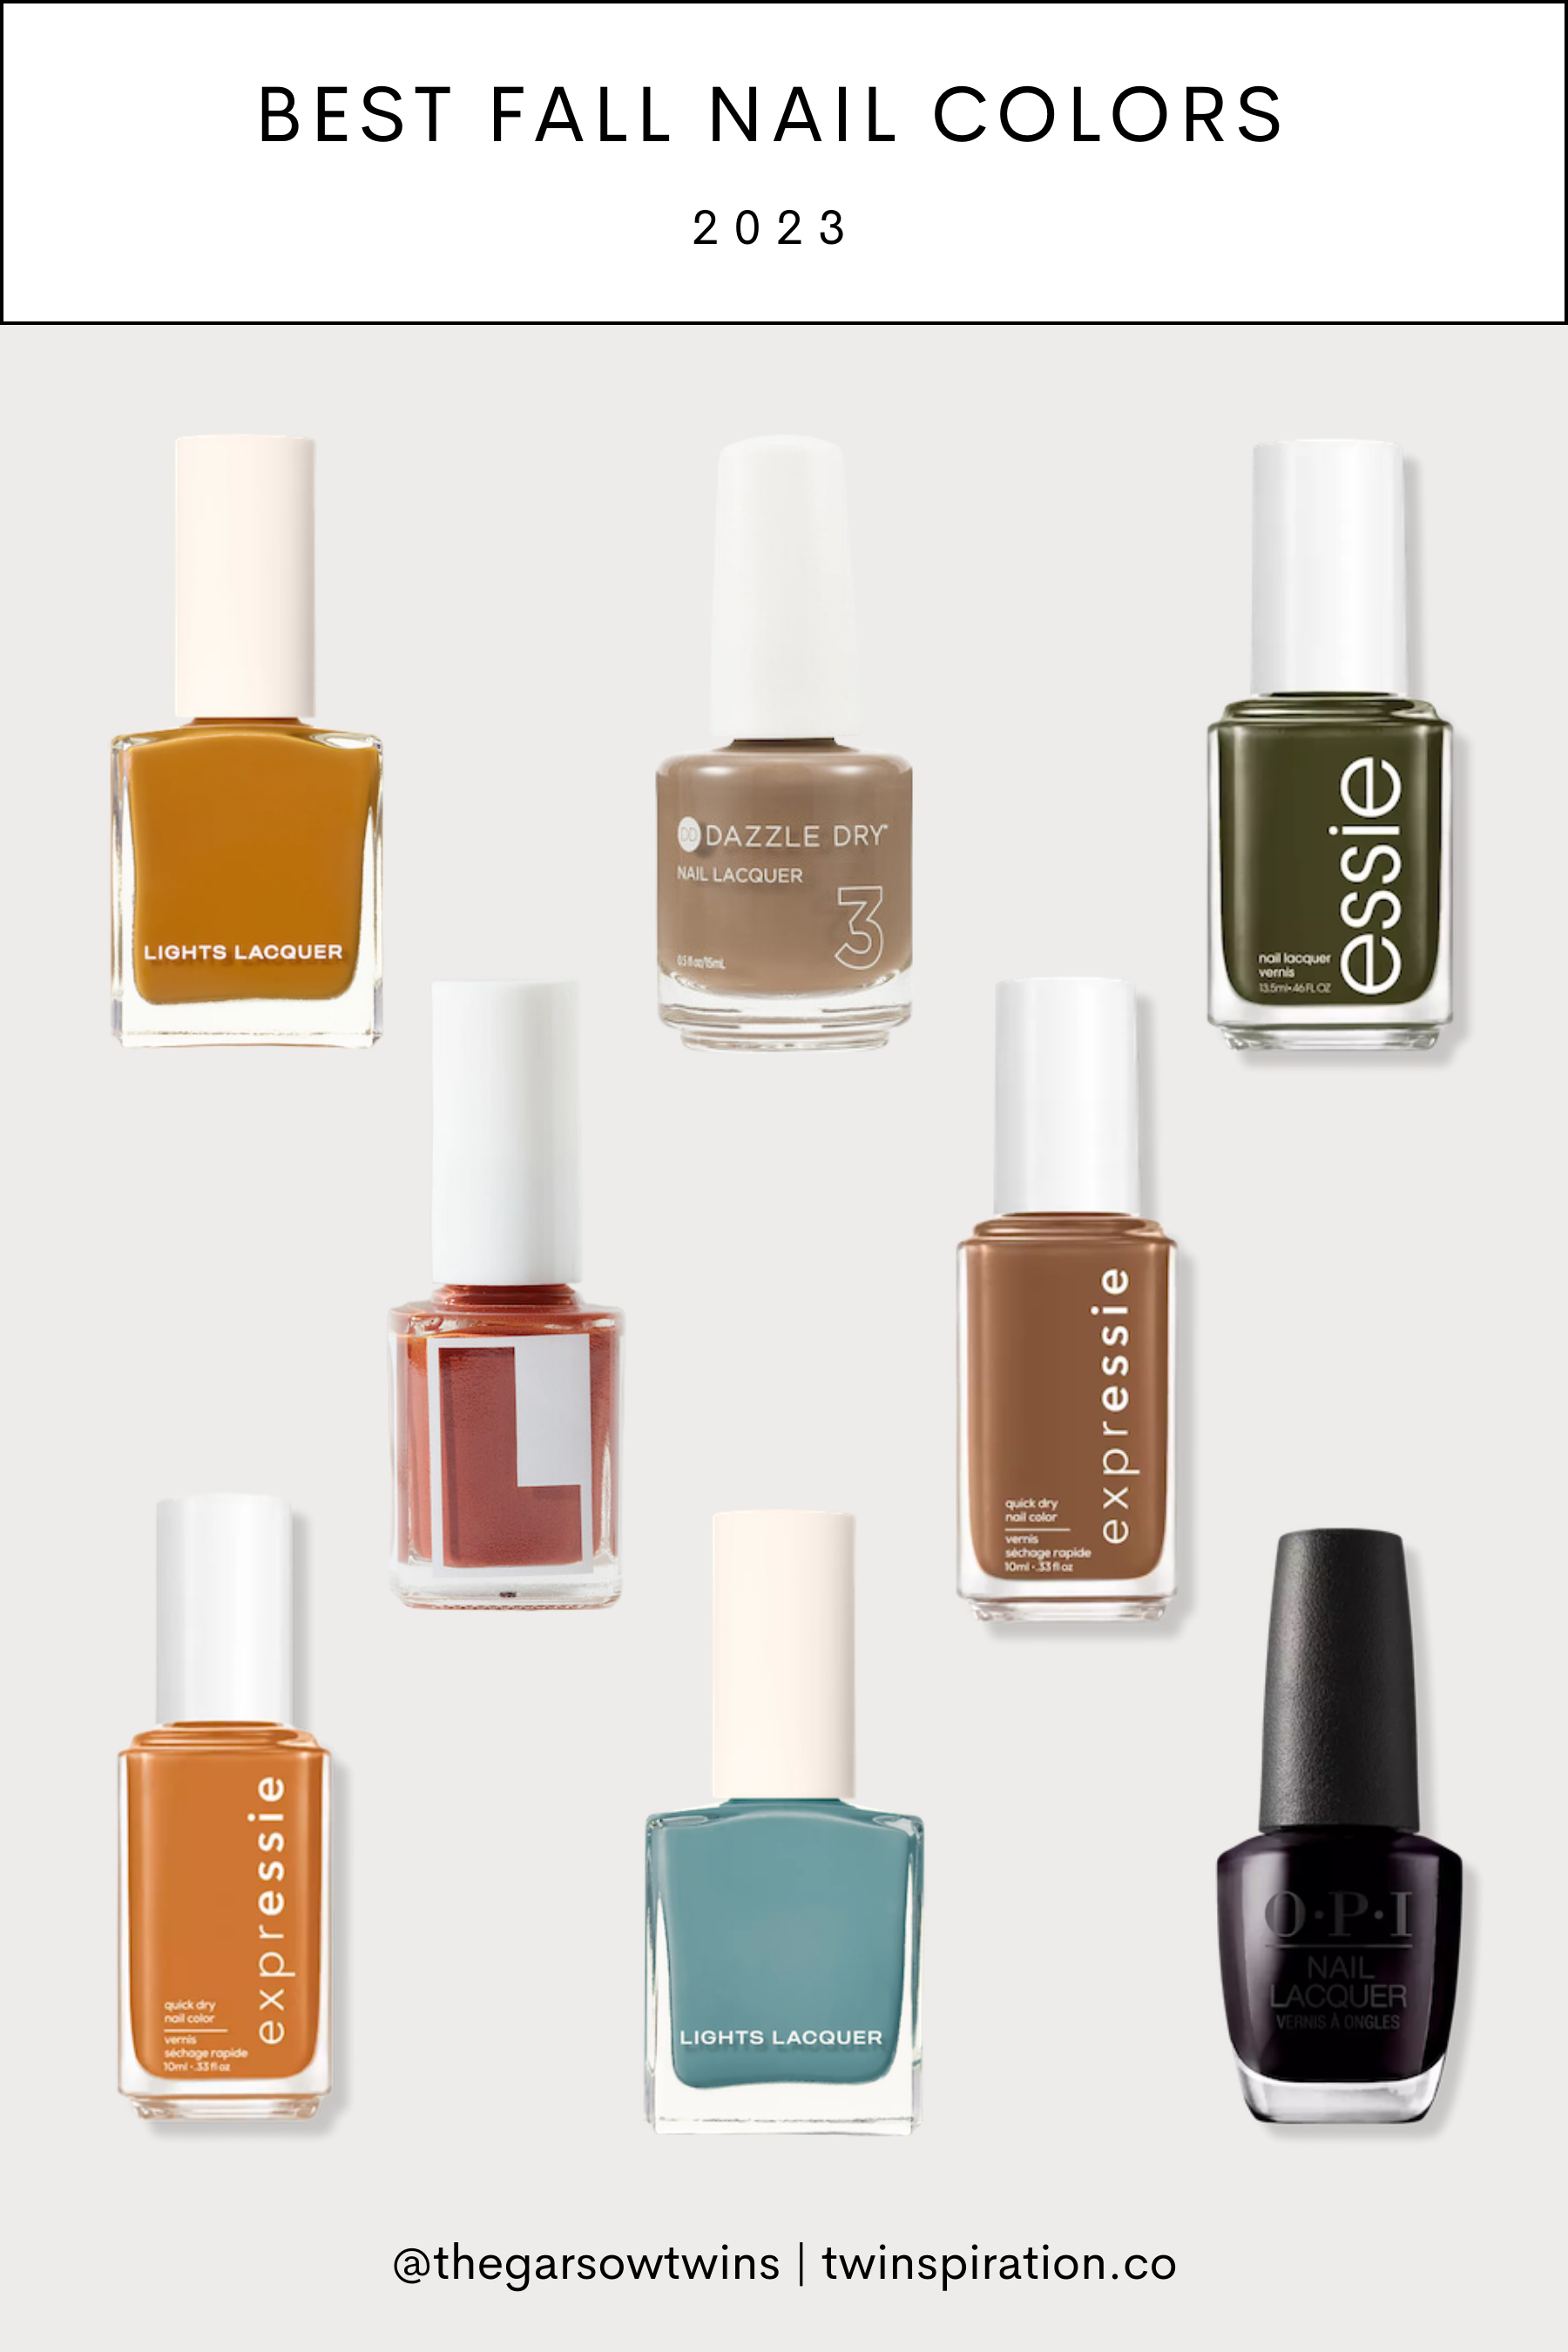 26 Best Fall Nail Colors Of 2022 - Trendy Autumn Nail Colors